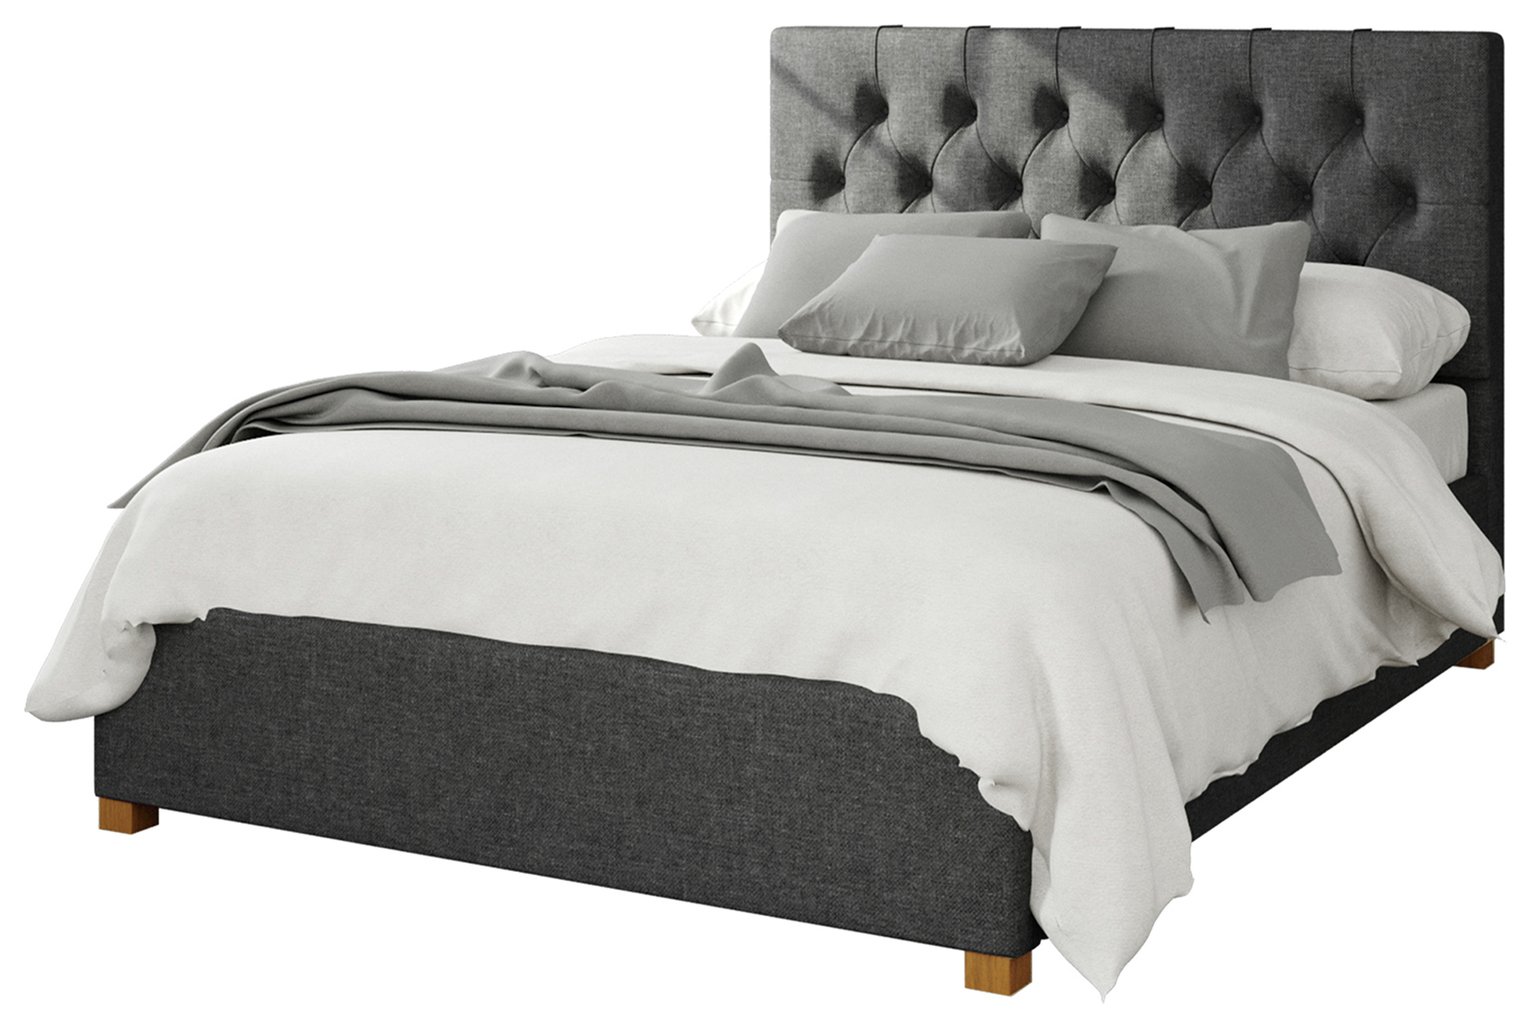 Aspire Olivier Twill Double Ottoman Bedframe - Charcoal